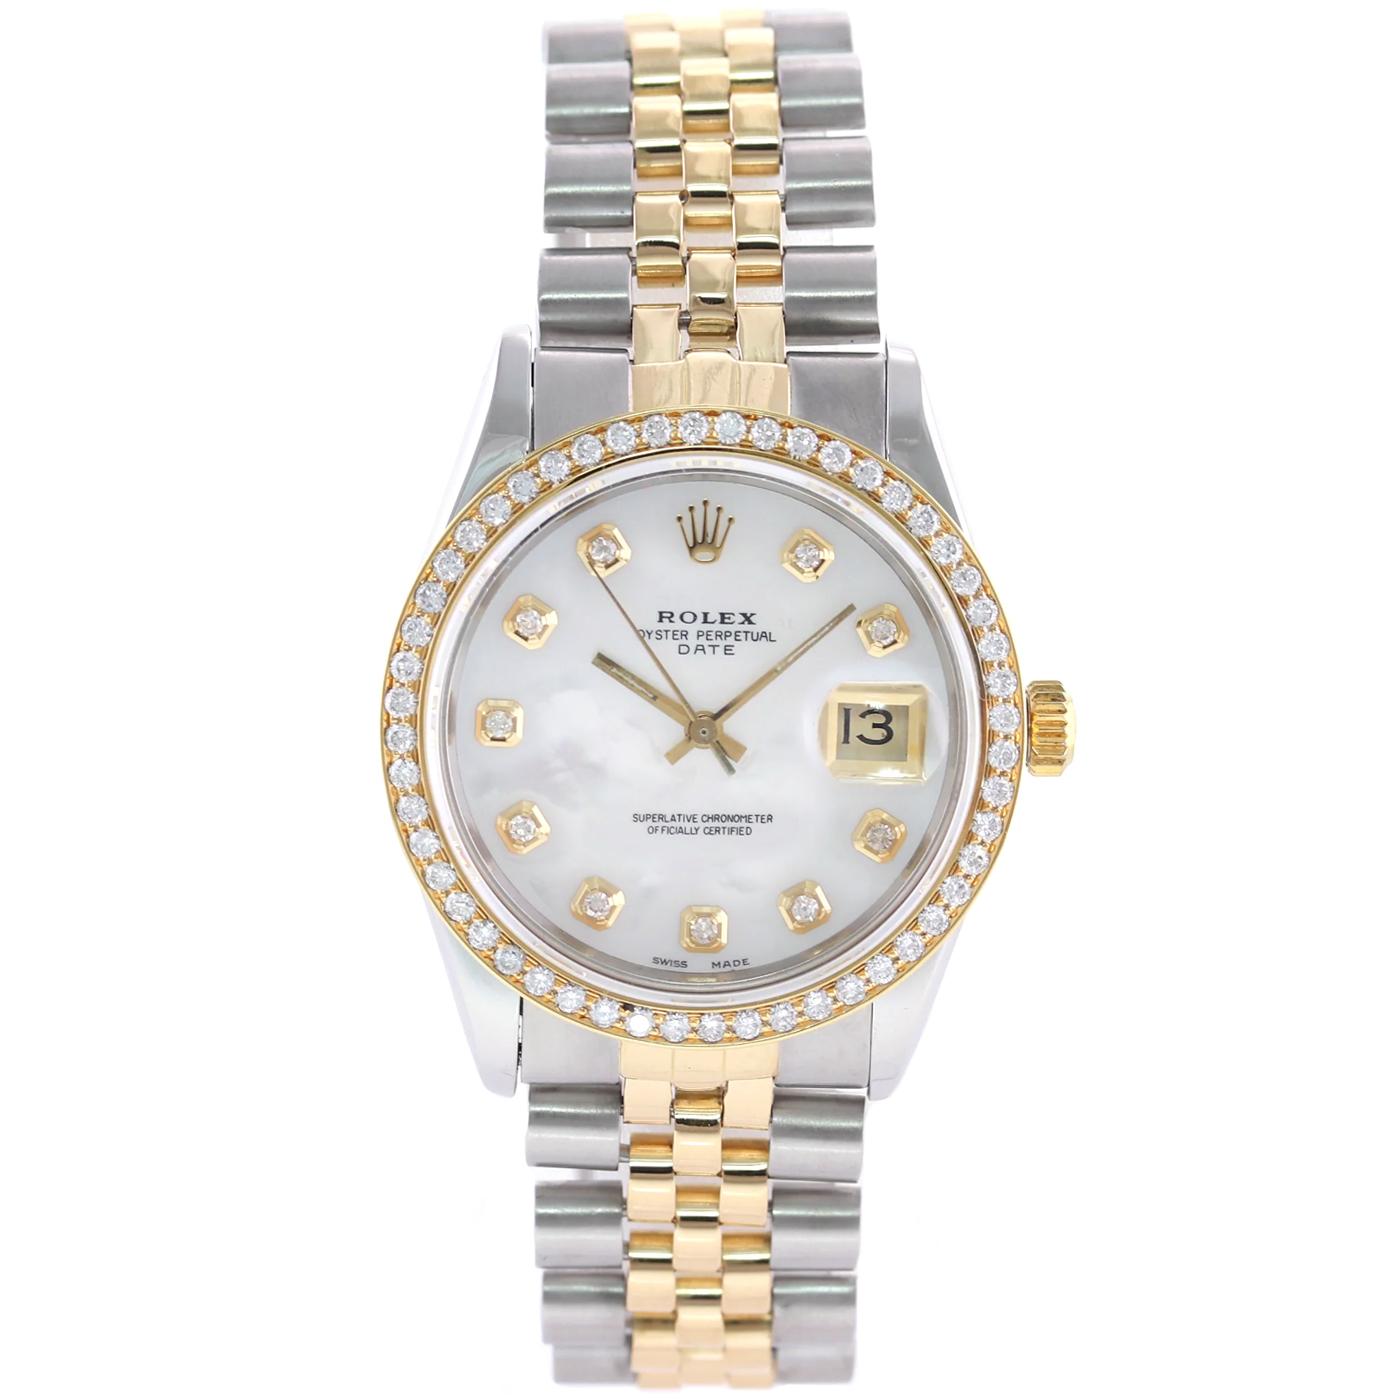 Rolex Oyster Perpetual Date 15053, Case Size/Material: 34mm Stainless Steel/Gold, Aftermarket Natural Diamond Bezel, Aftermarket Mother of Pearls Diamond Hour Markers (Dial), with Automatic Movement, Stainless Steel, and Yellow Gold Oyster Bracelet